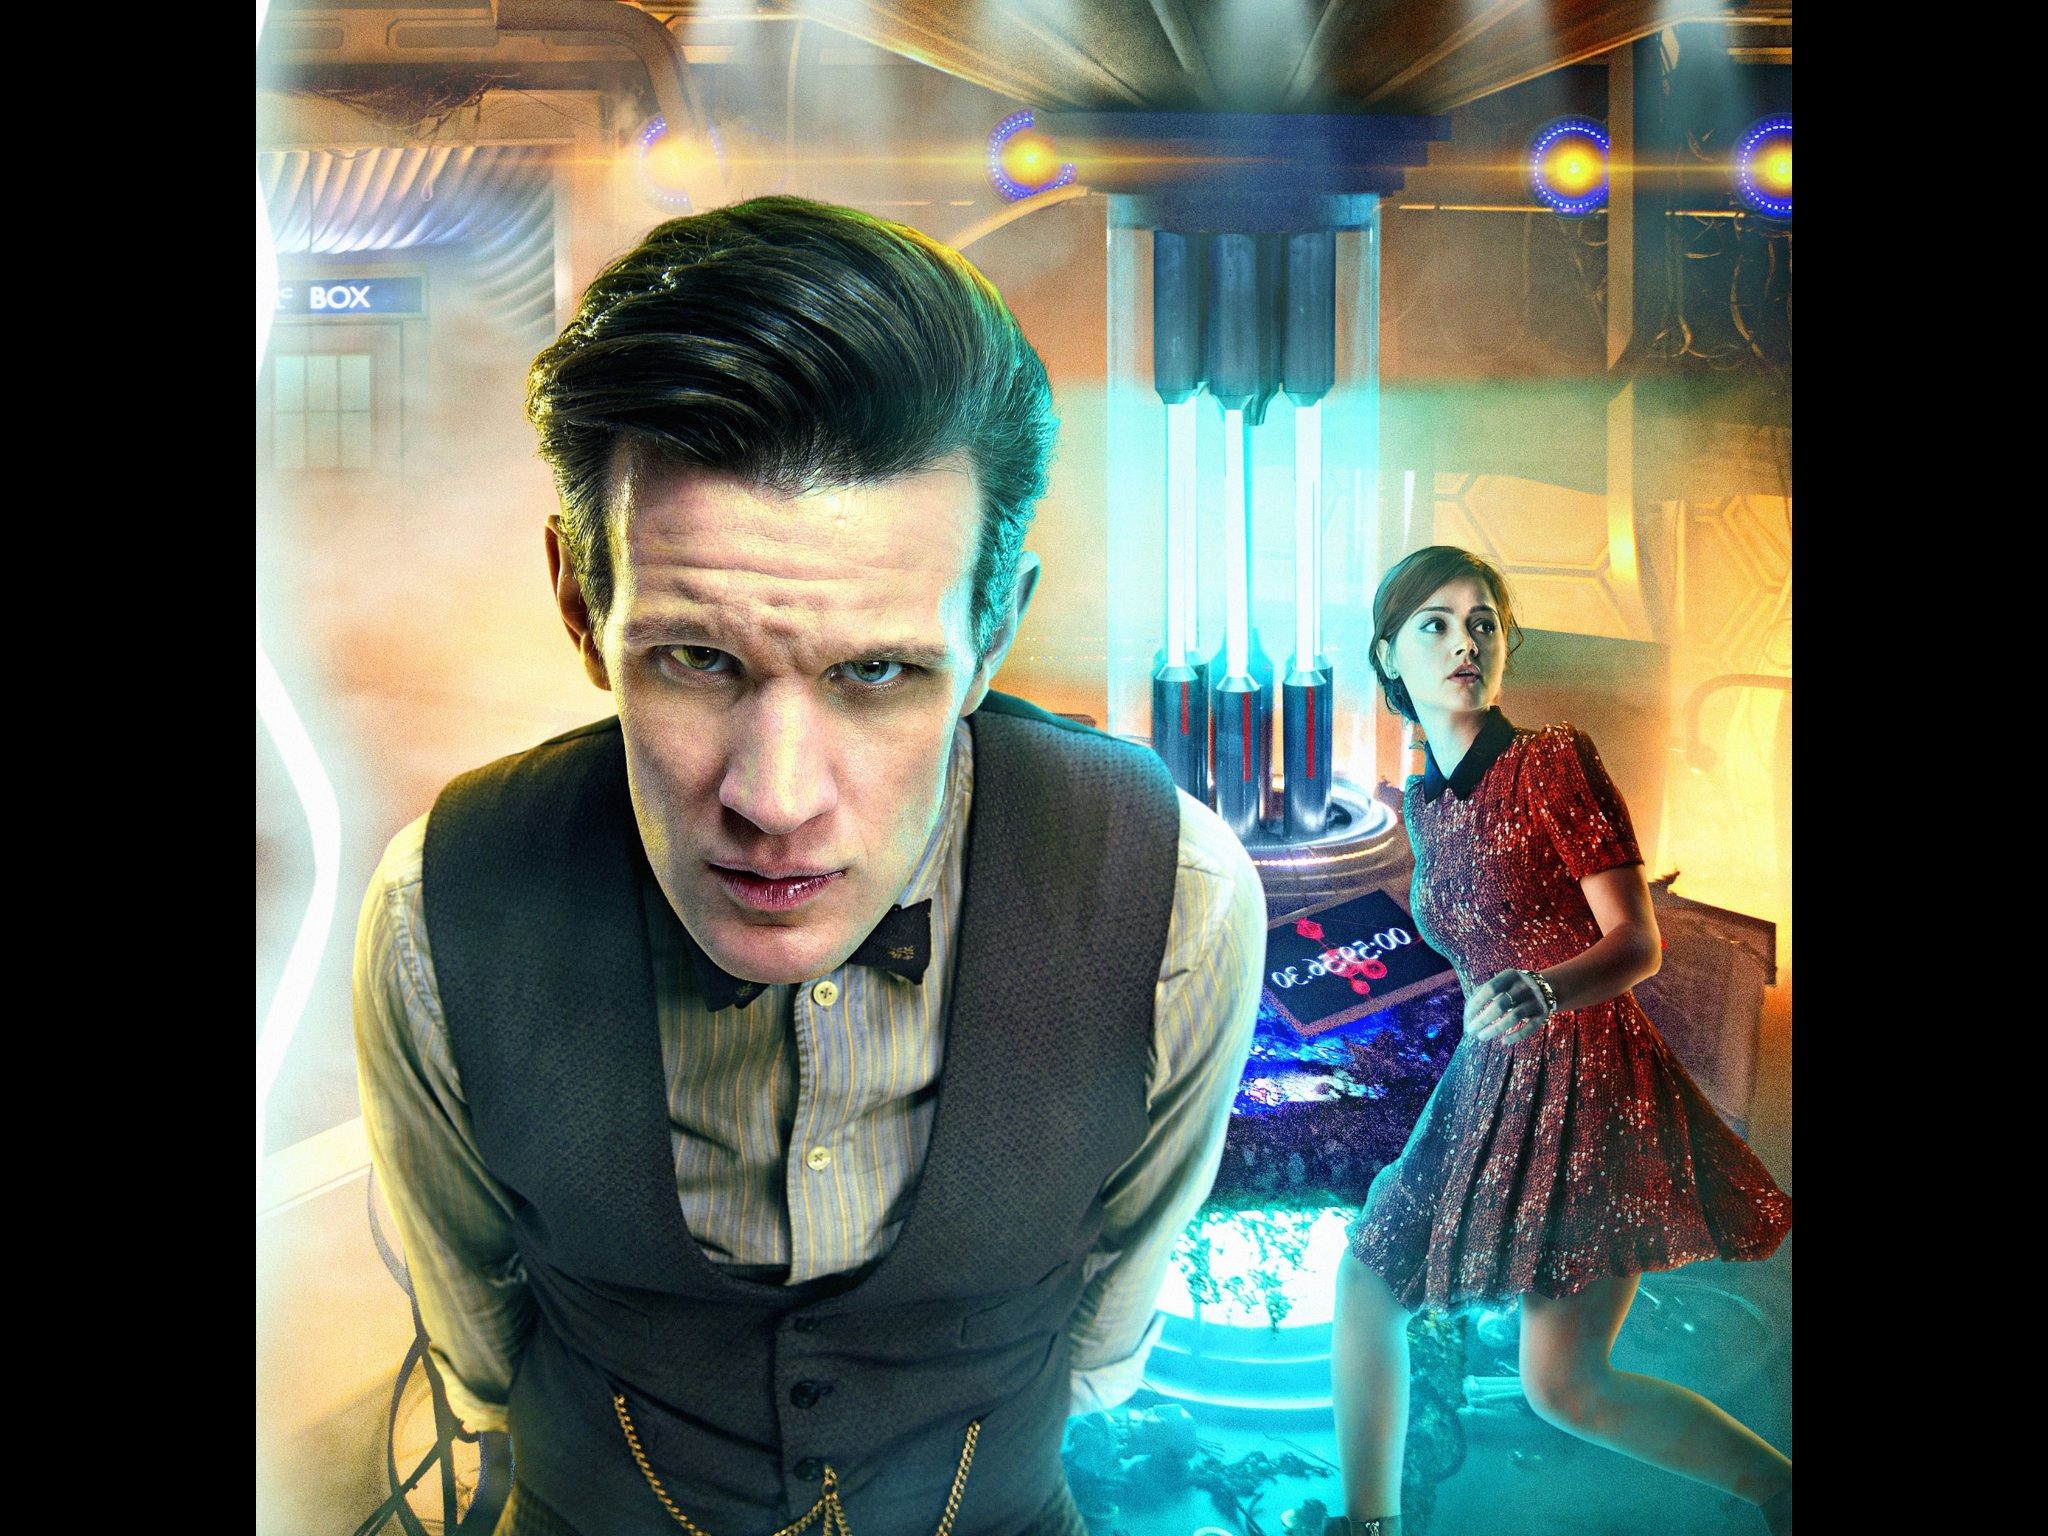 2048x1536 Wallpaper from a doctor who app. With...[drumroll] Matt Smith